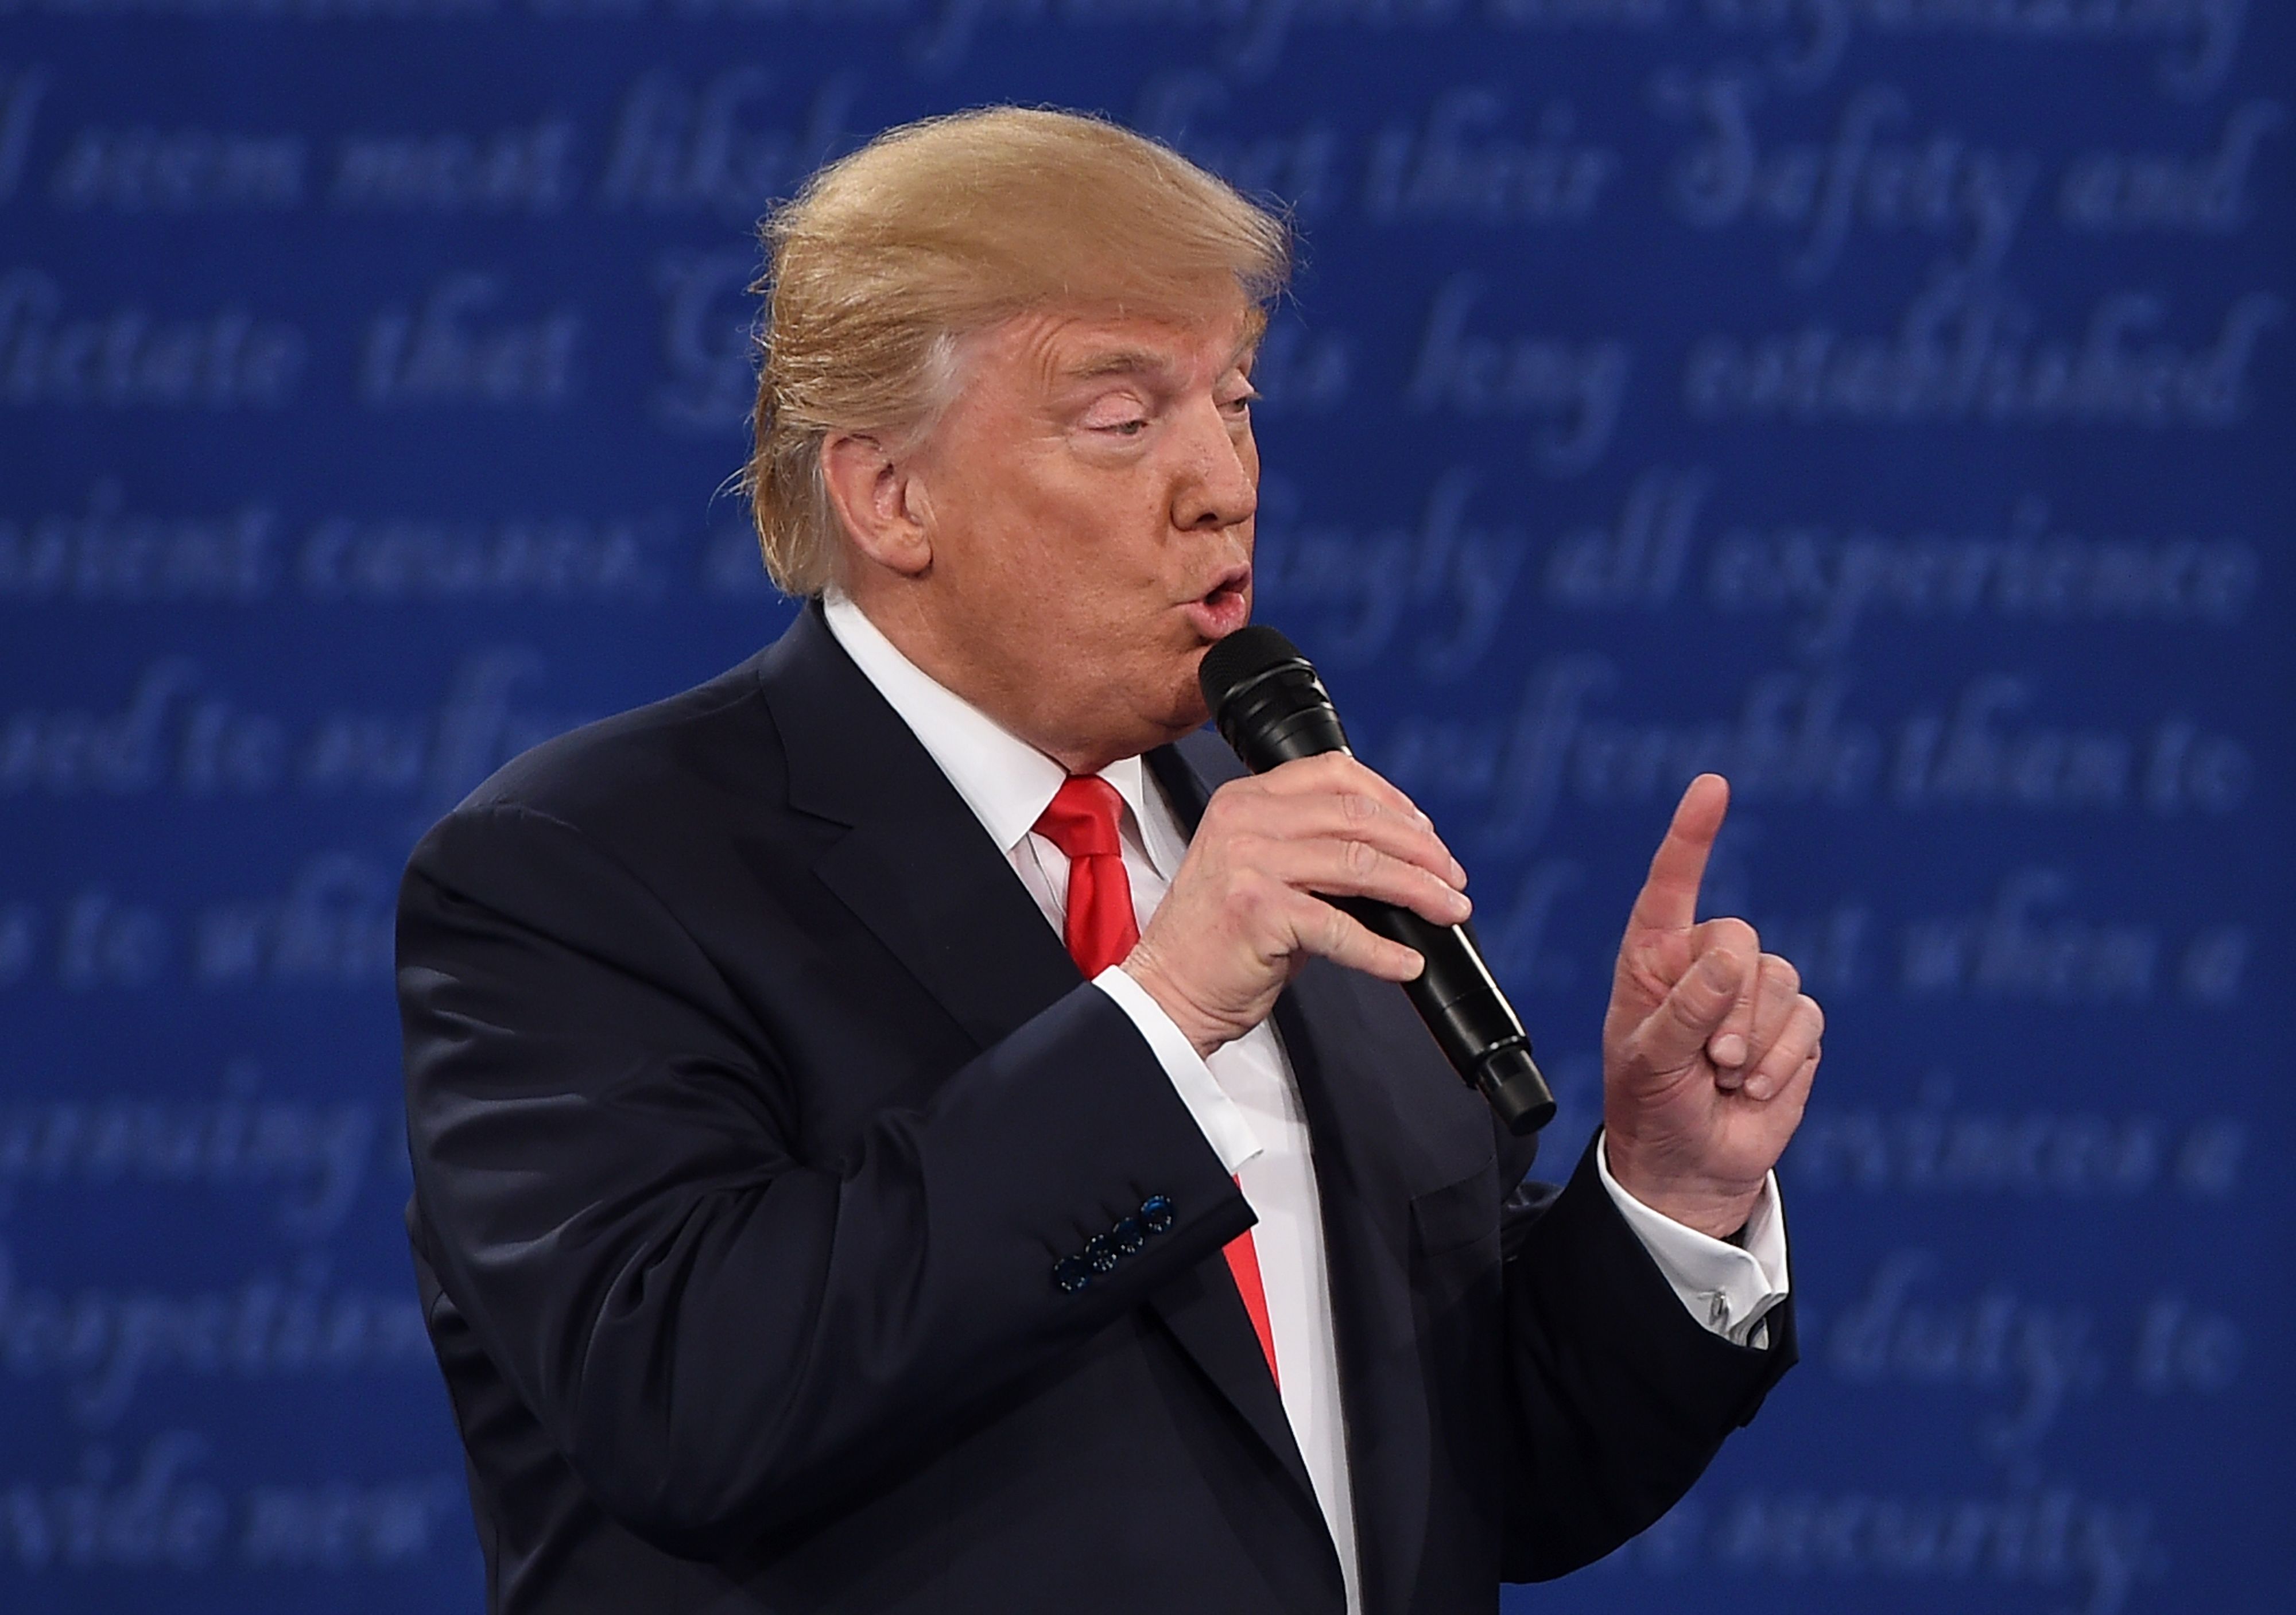 Republican presidential candidate Donald Trump speaks during the second presidential debate at Washington University in St. Louis, on Oct. 9, 2016.